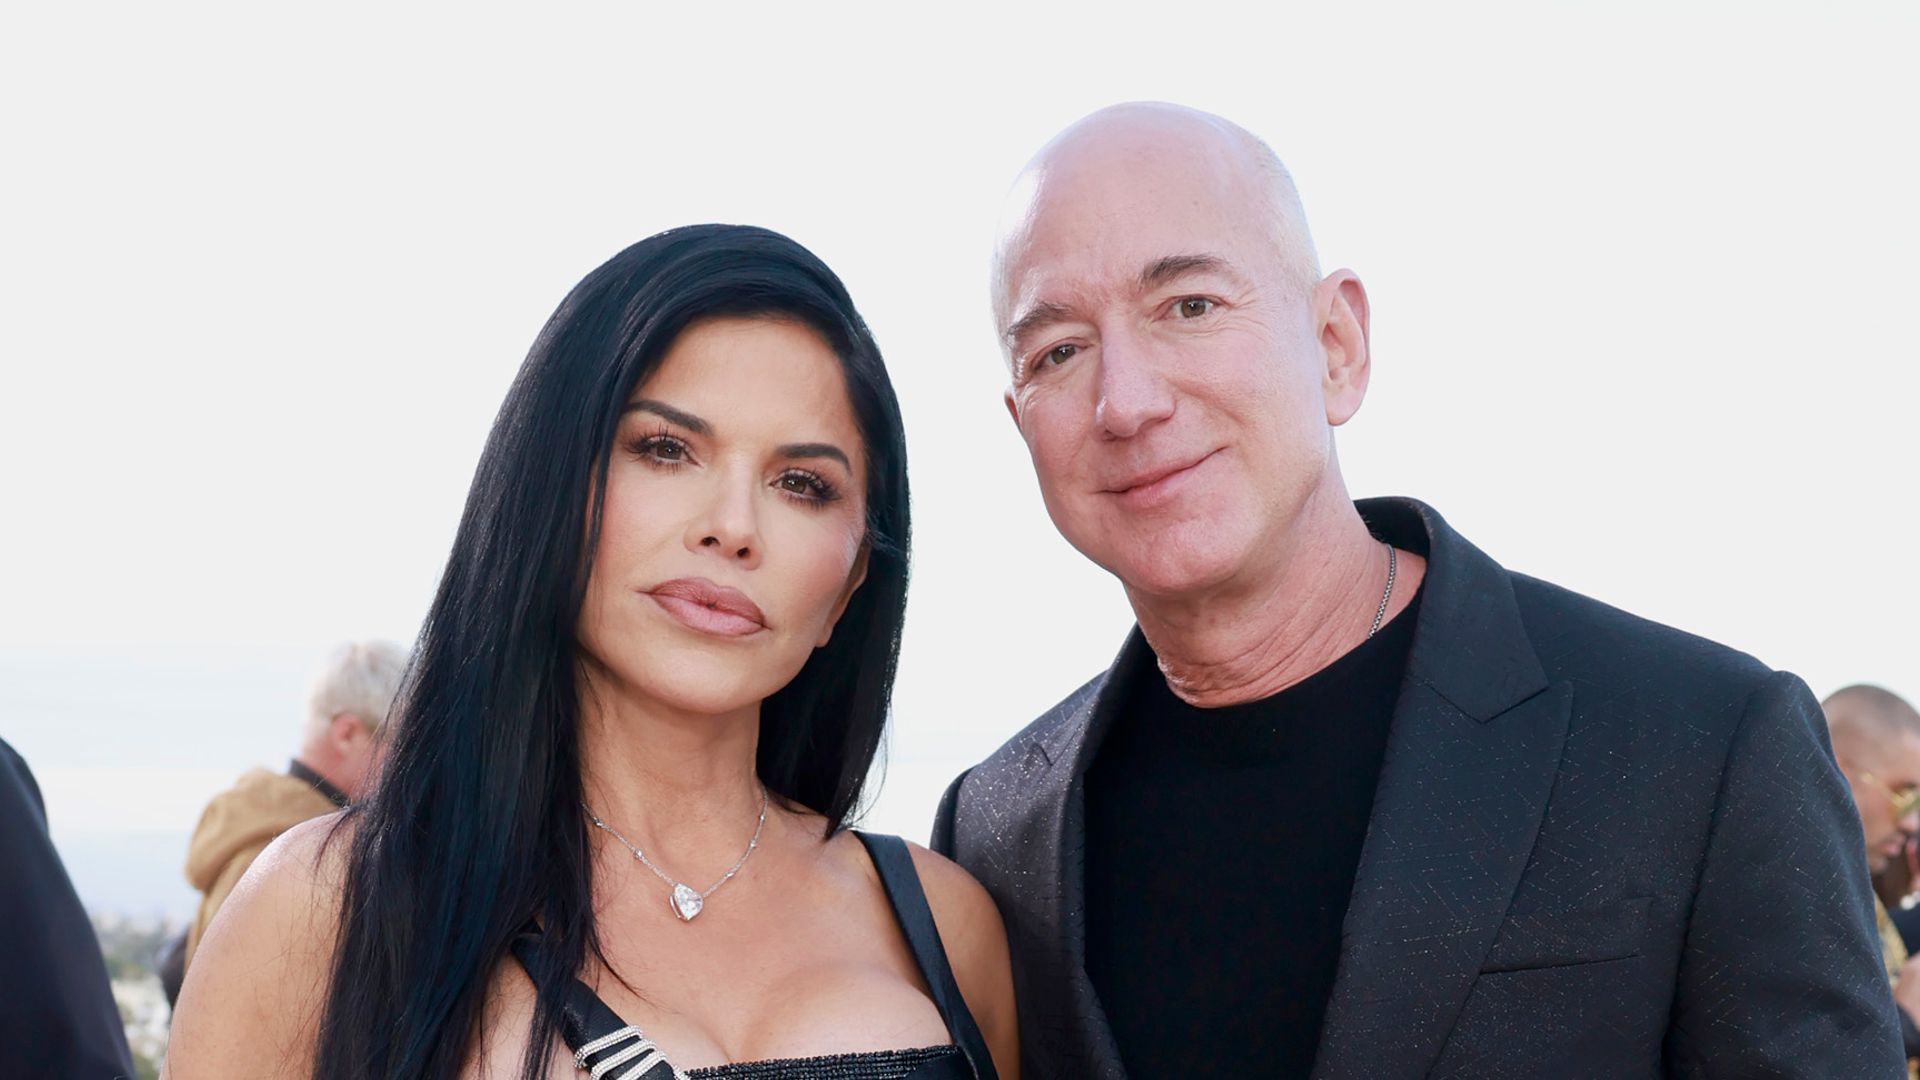 Lauren SÃ¡nchez and Jeff Bezos attend the Versace FW23 Show at Pacific Design Center on March 09, 2023 in West Hollywood, California.